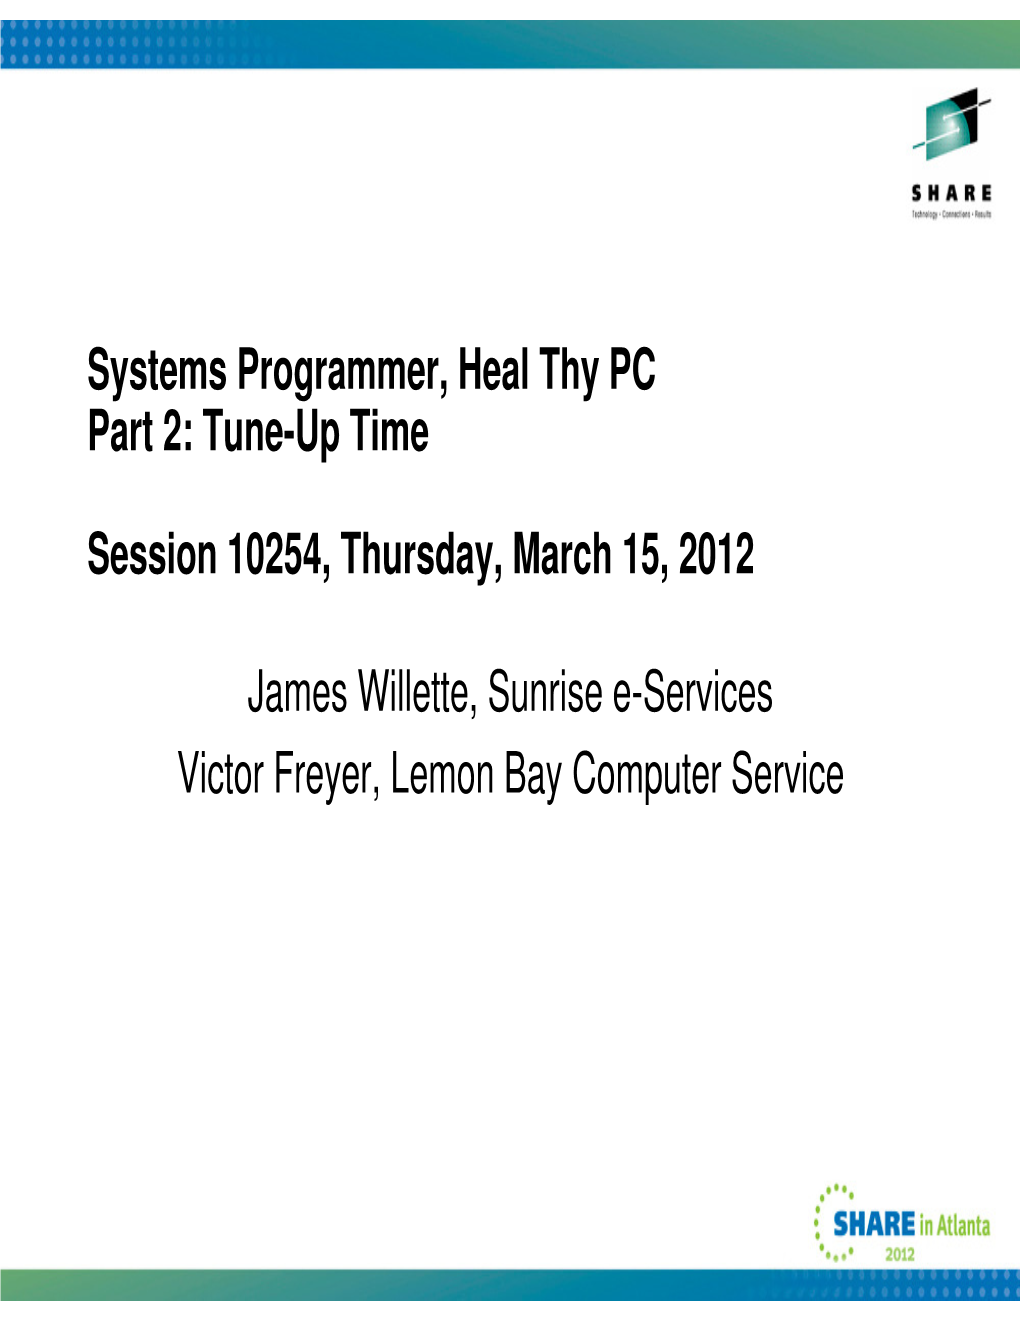 Systems Programmer, Heal Thy PC Part 2: Tune-Up Time Session